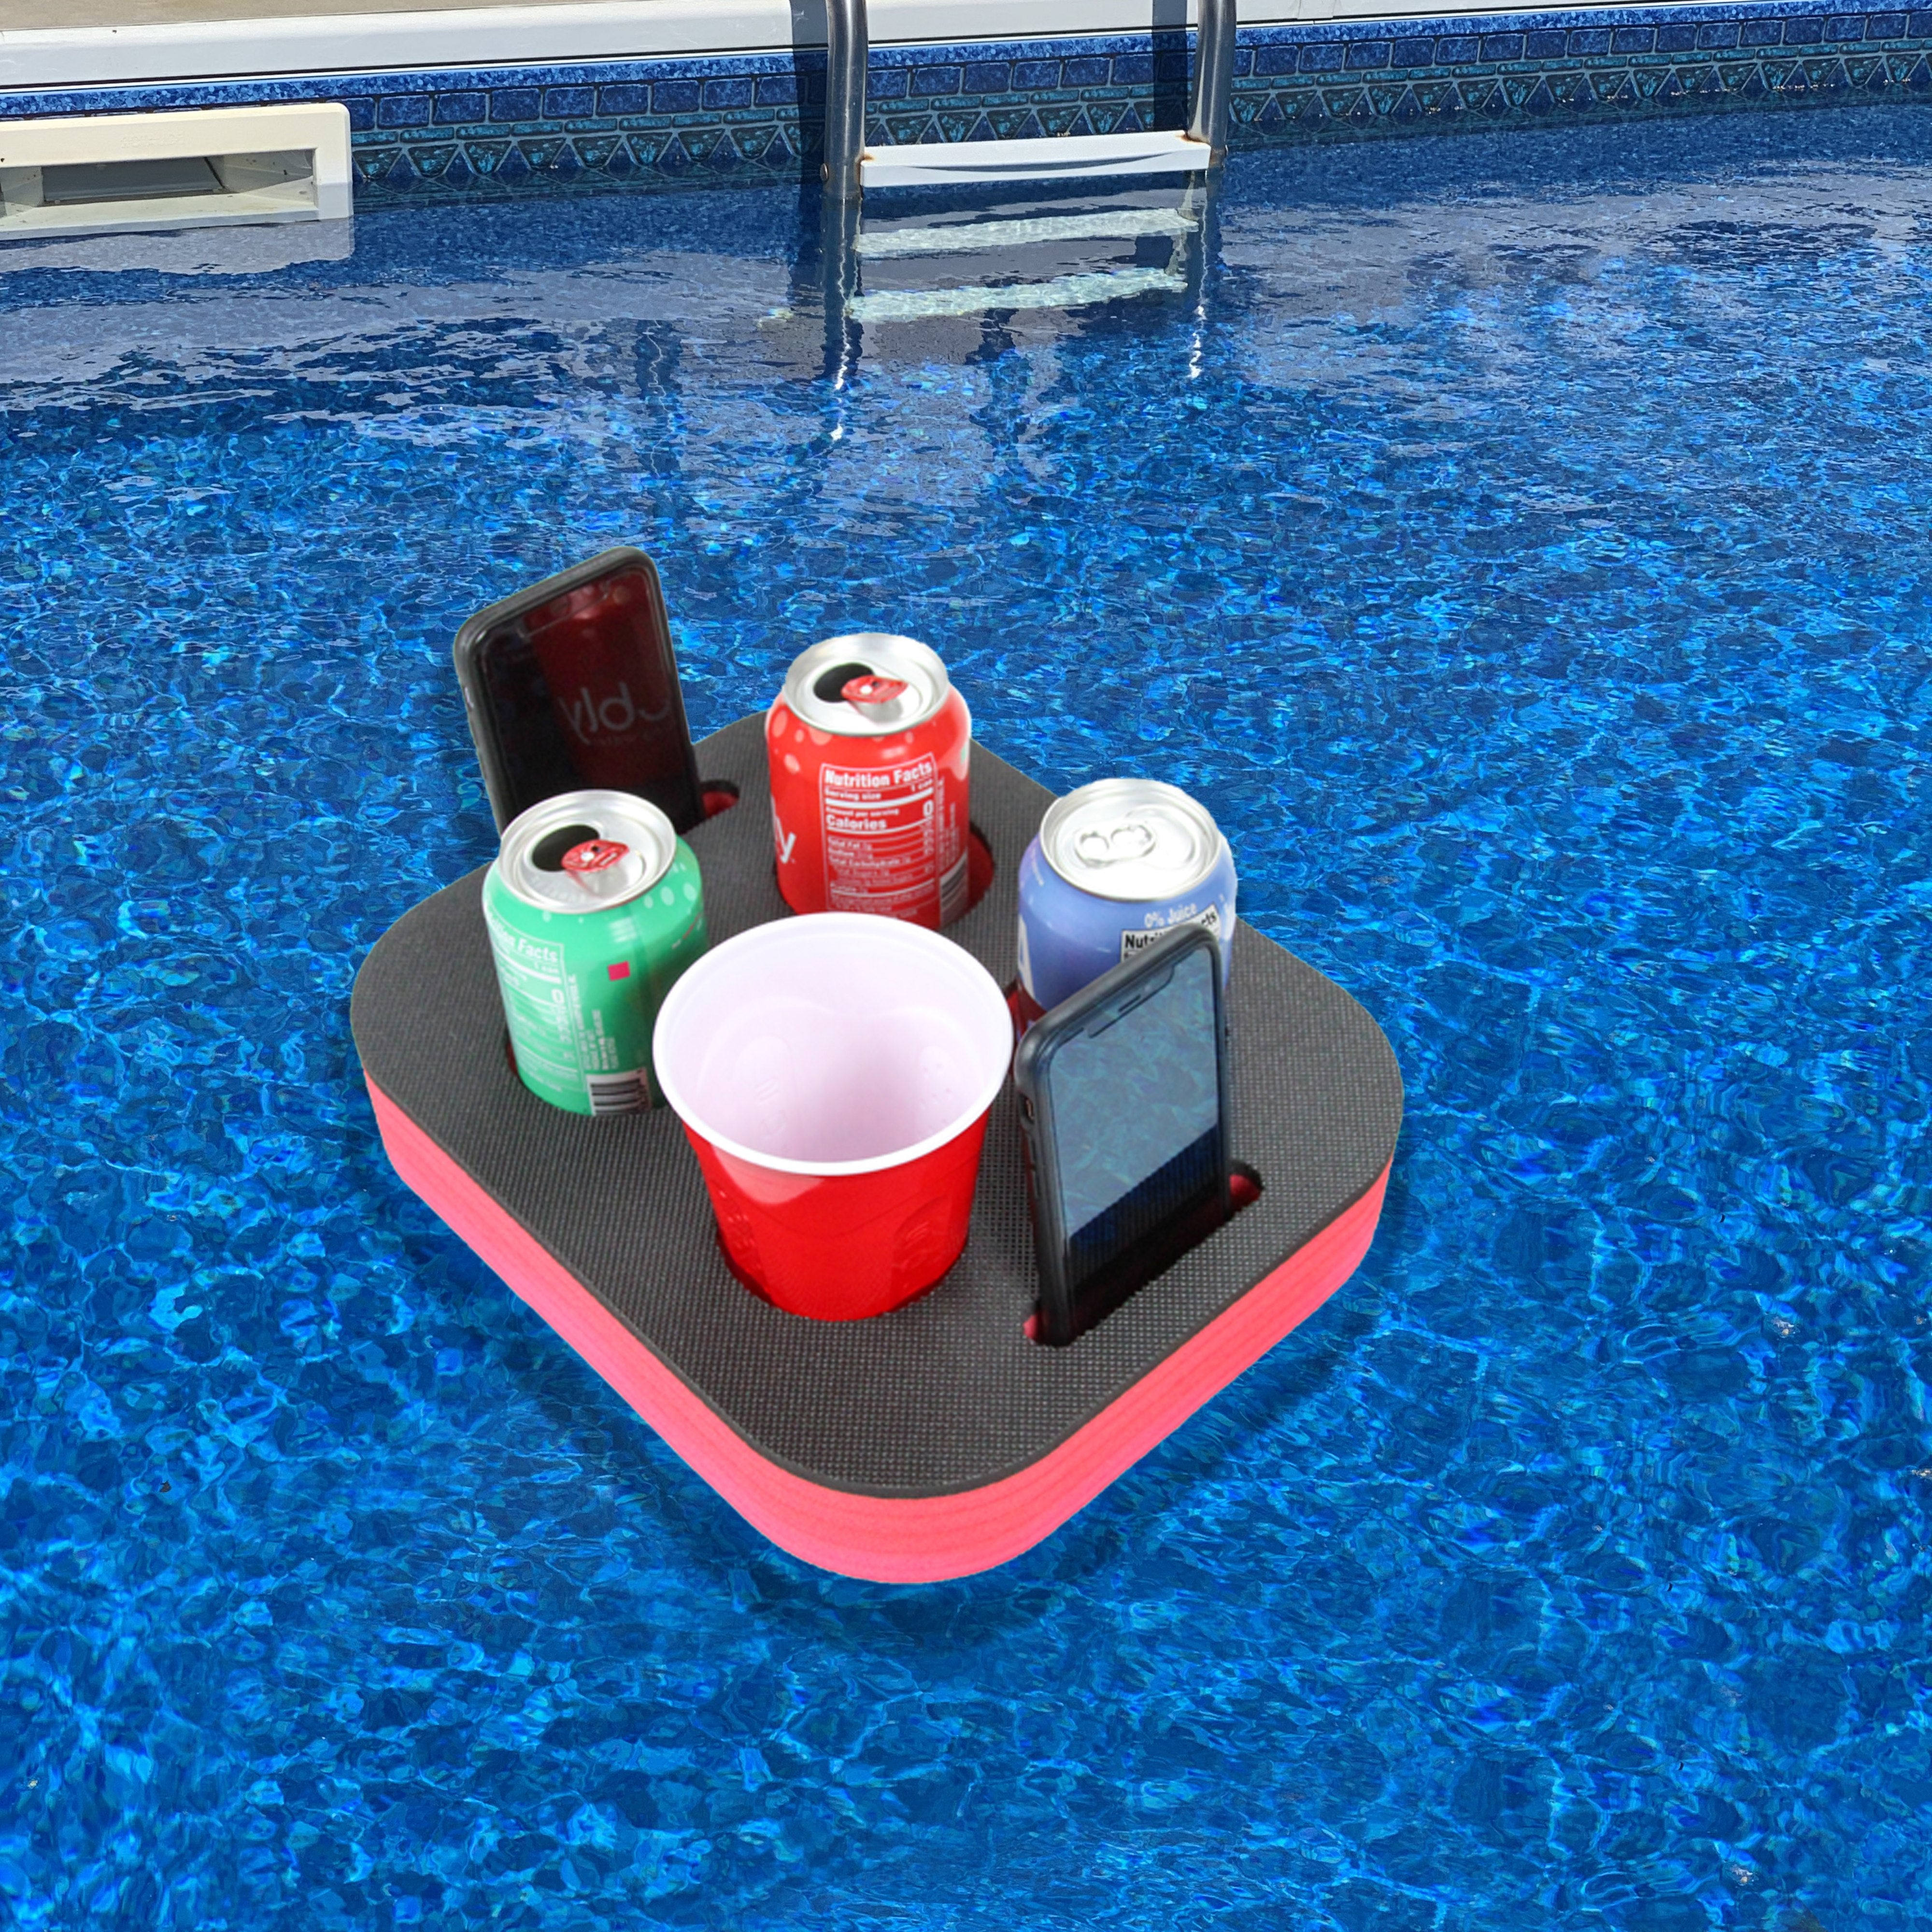 Drink Holder Floating Red Refreshment Tray for Pool or Beach Party Float Lounge Durable Foam 6 Compartment UV Resistant 12 x 10 Inches Cup Holders